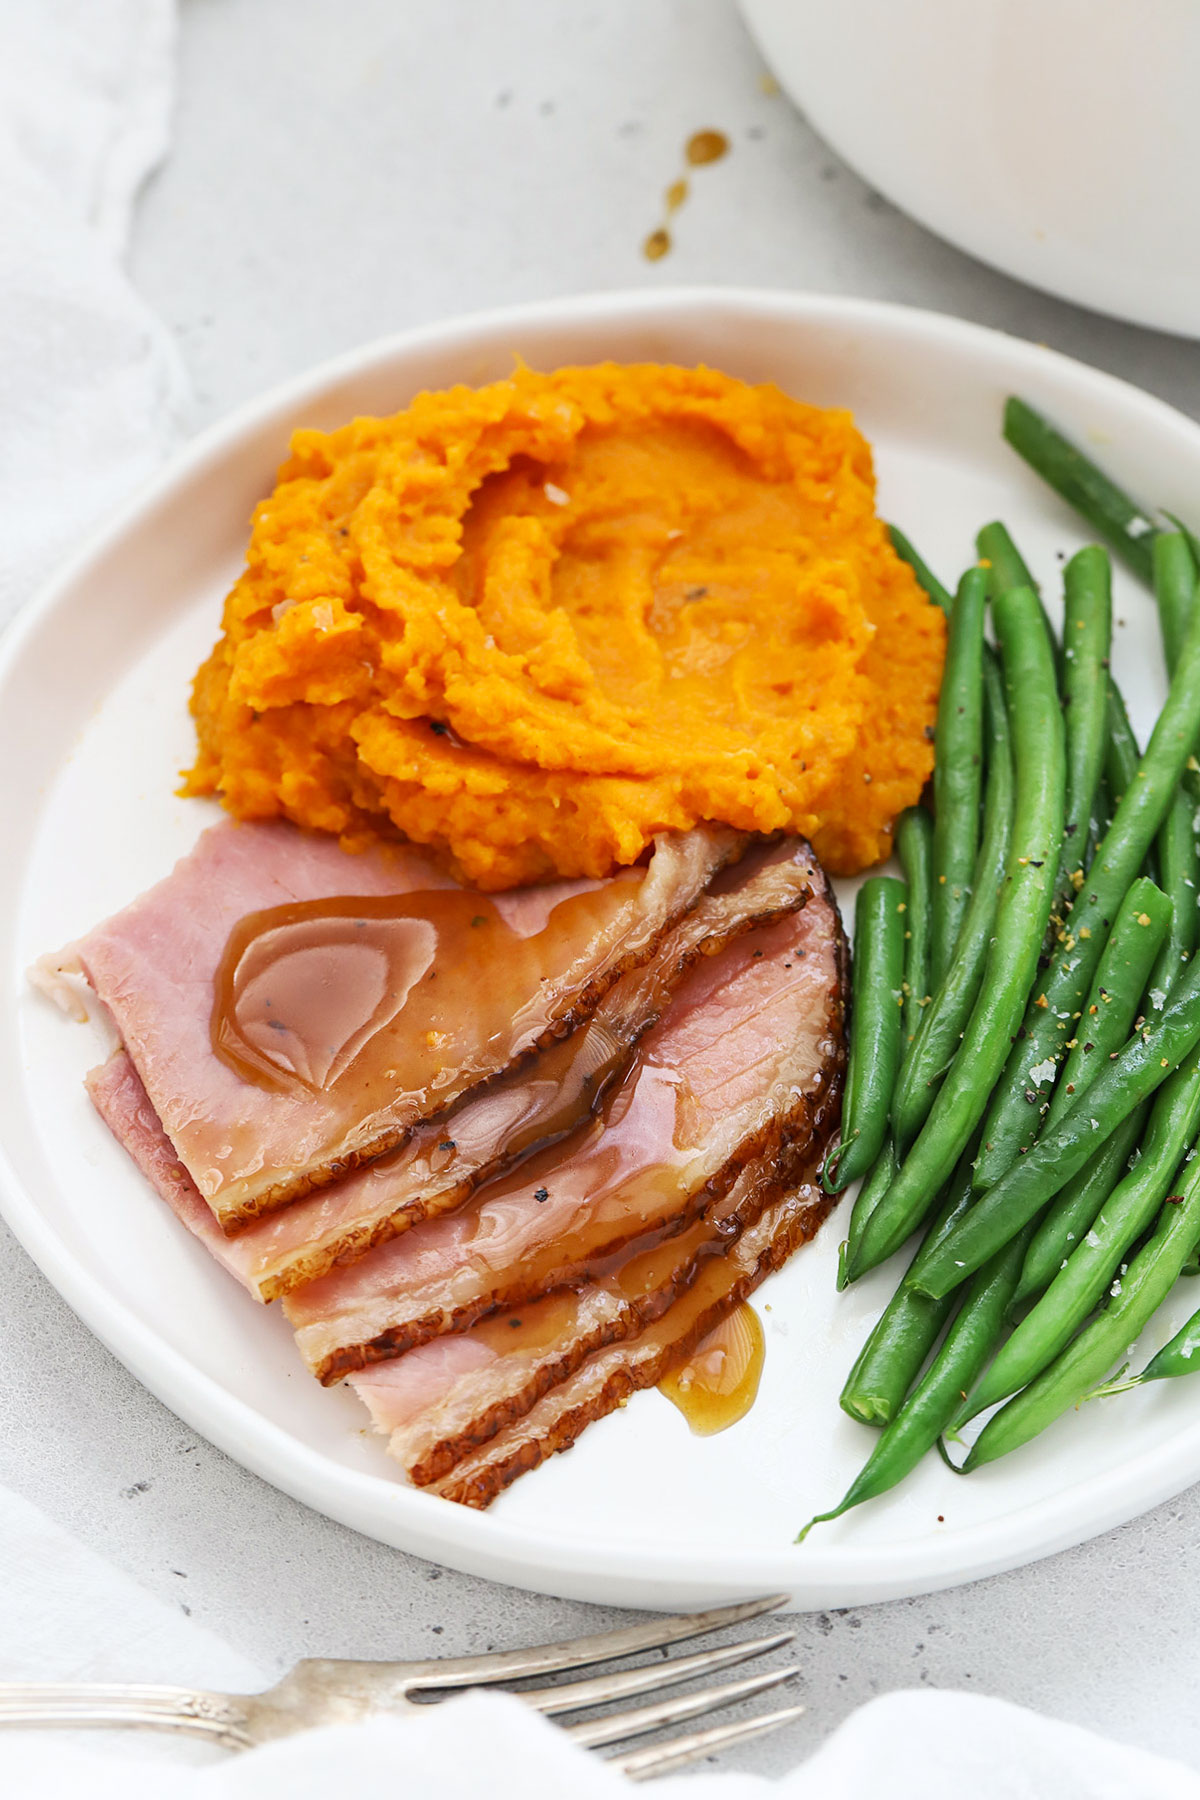 Slices of glazed ham on a white plate with mashed sweet potatoes and steamed green beans